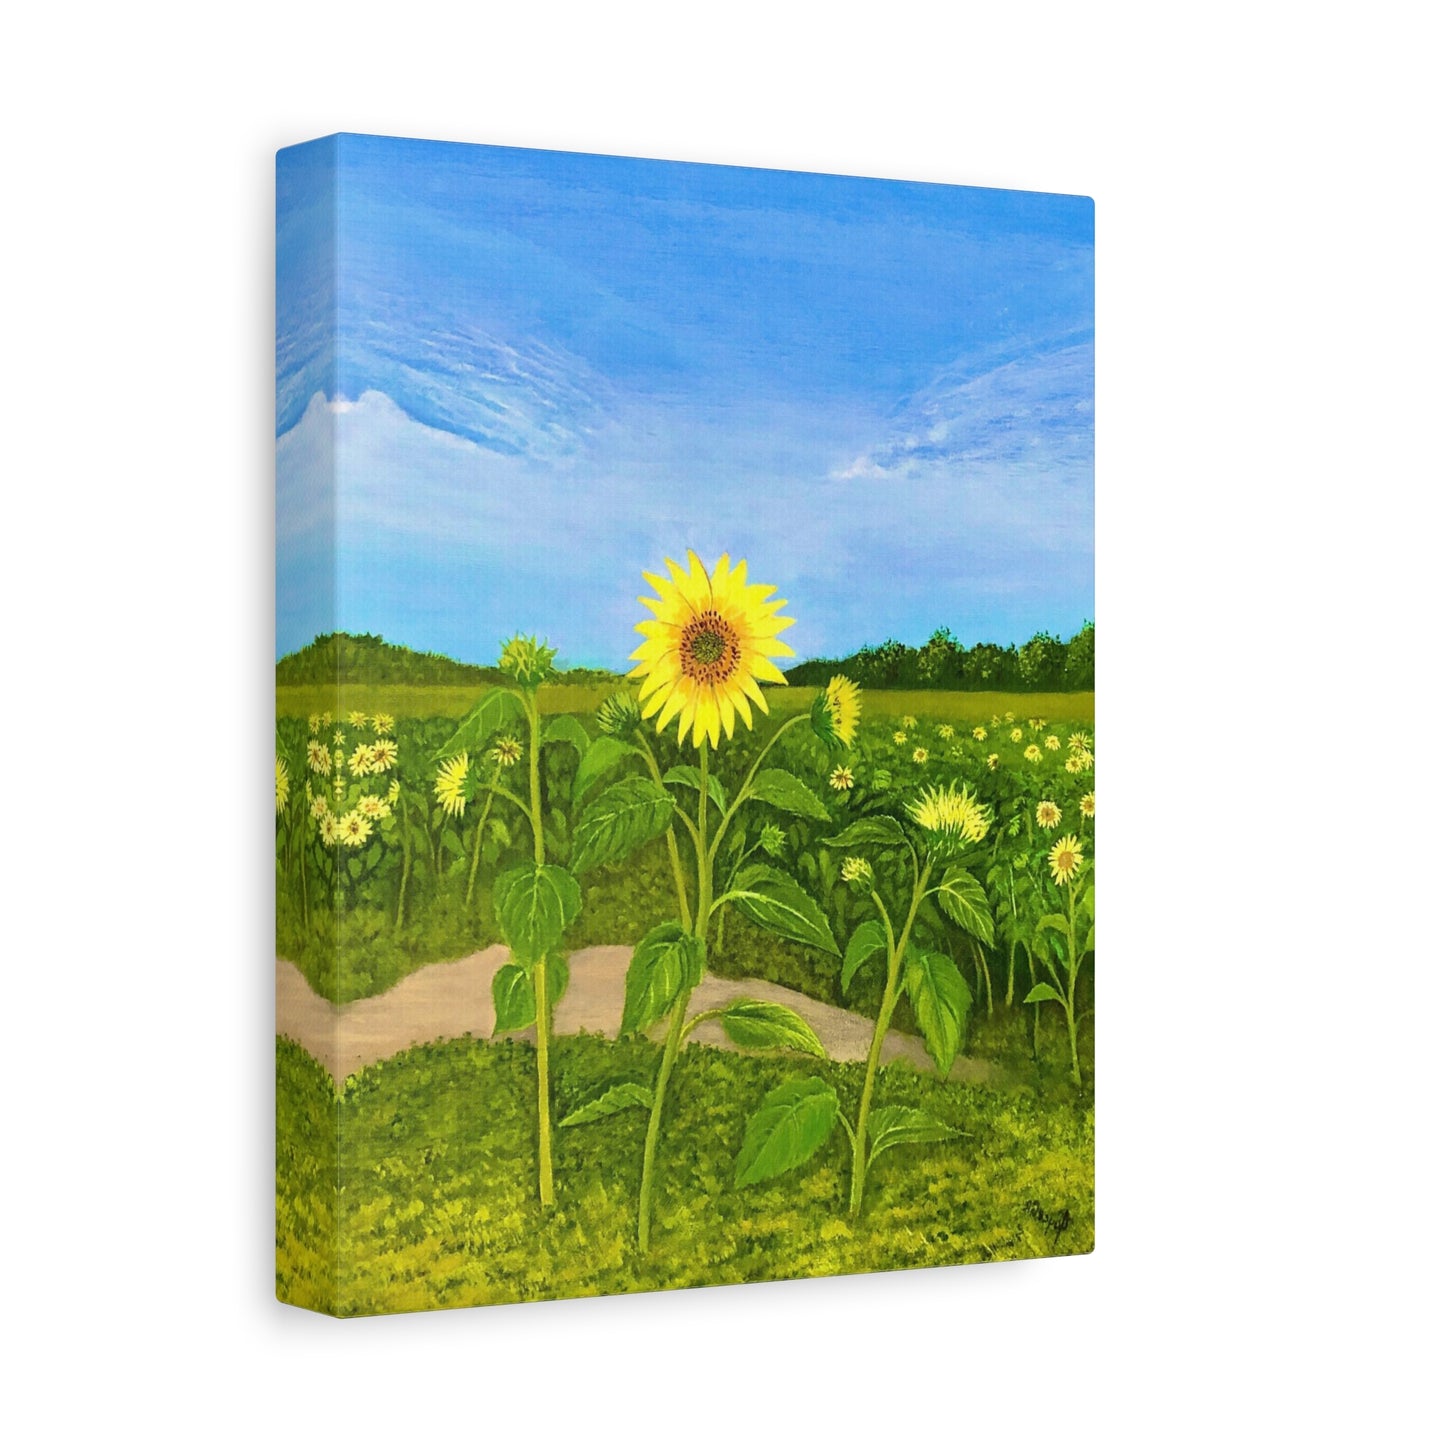 The Resilient Sunflower. Painting Print on canvas